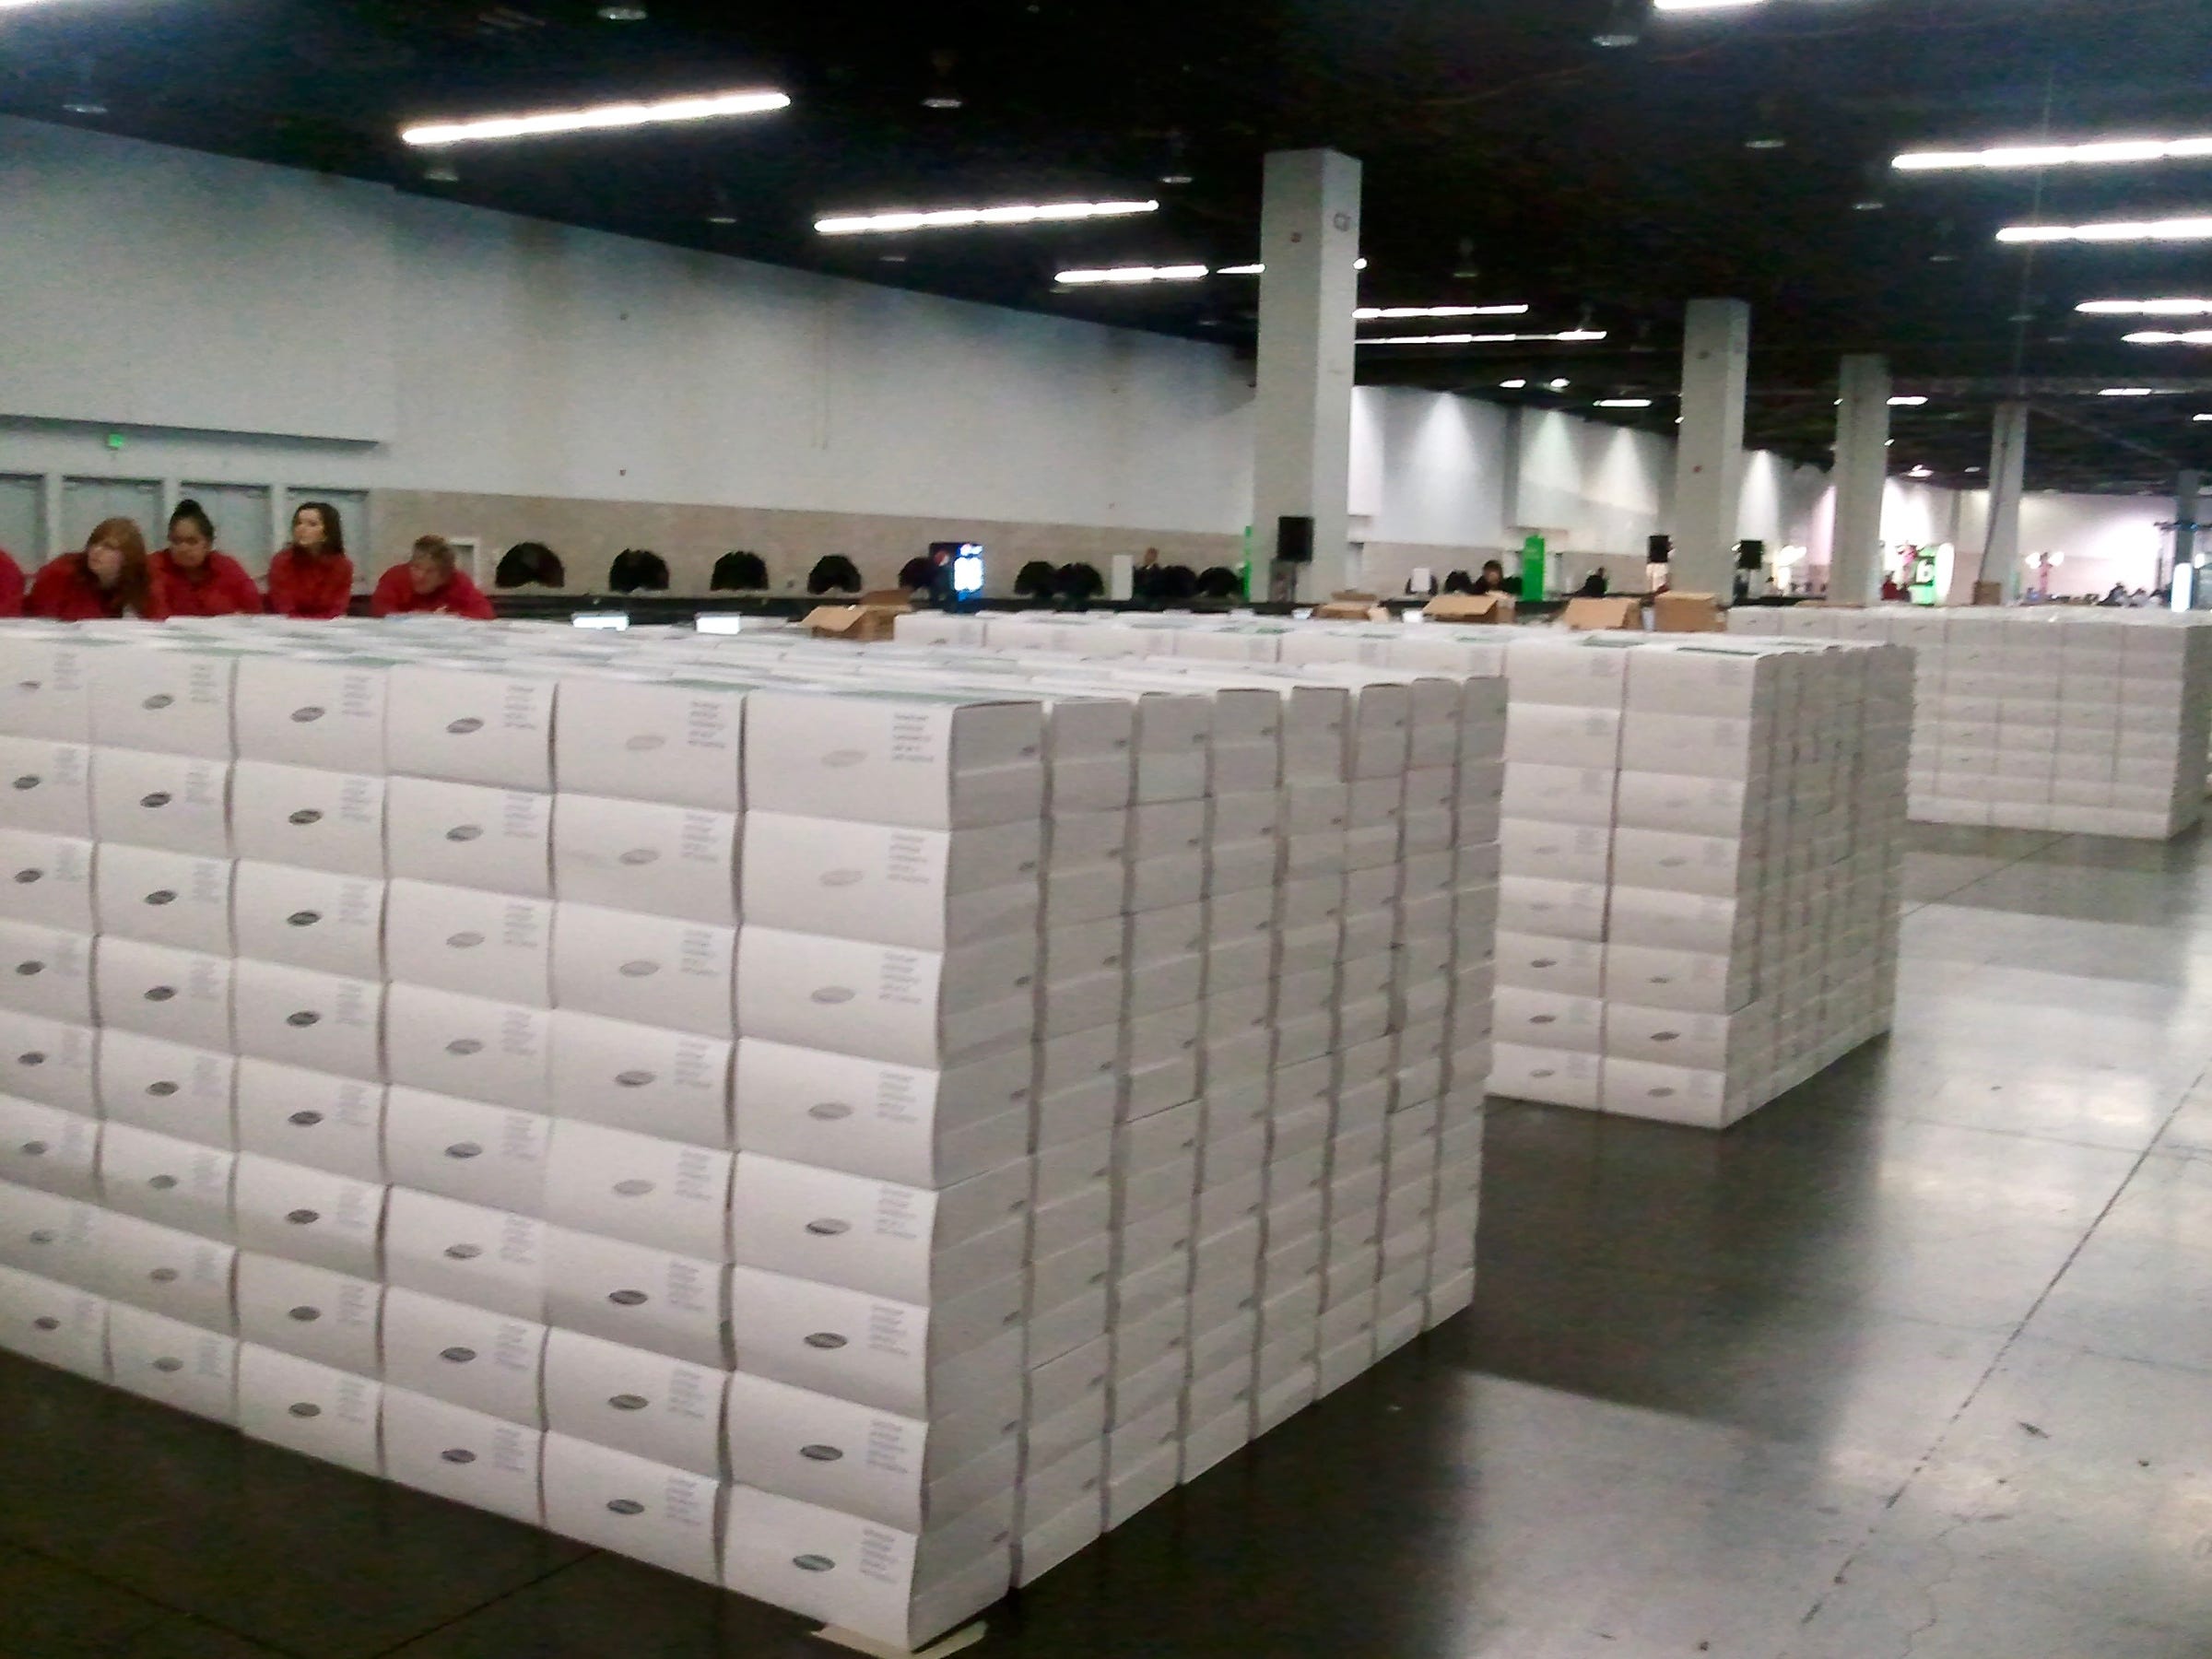 Stacks of Samsung PCs ready to be distributed.